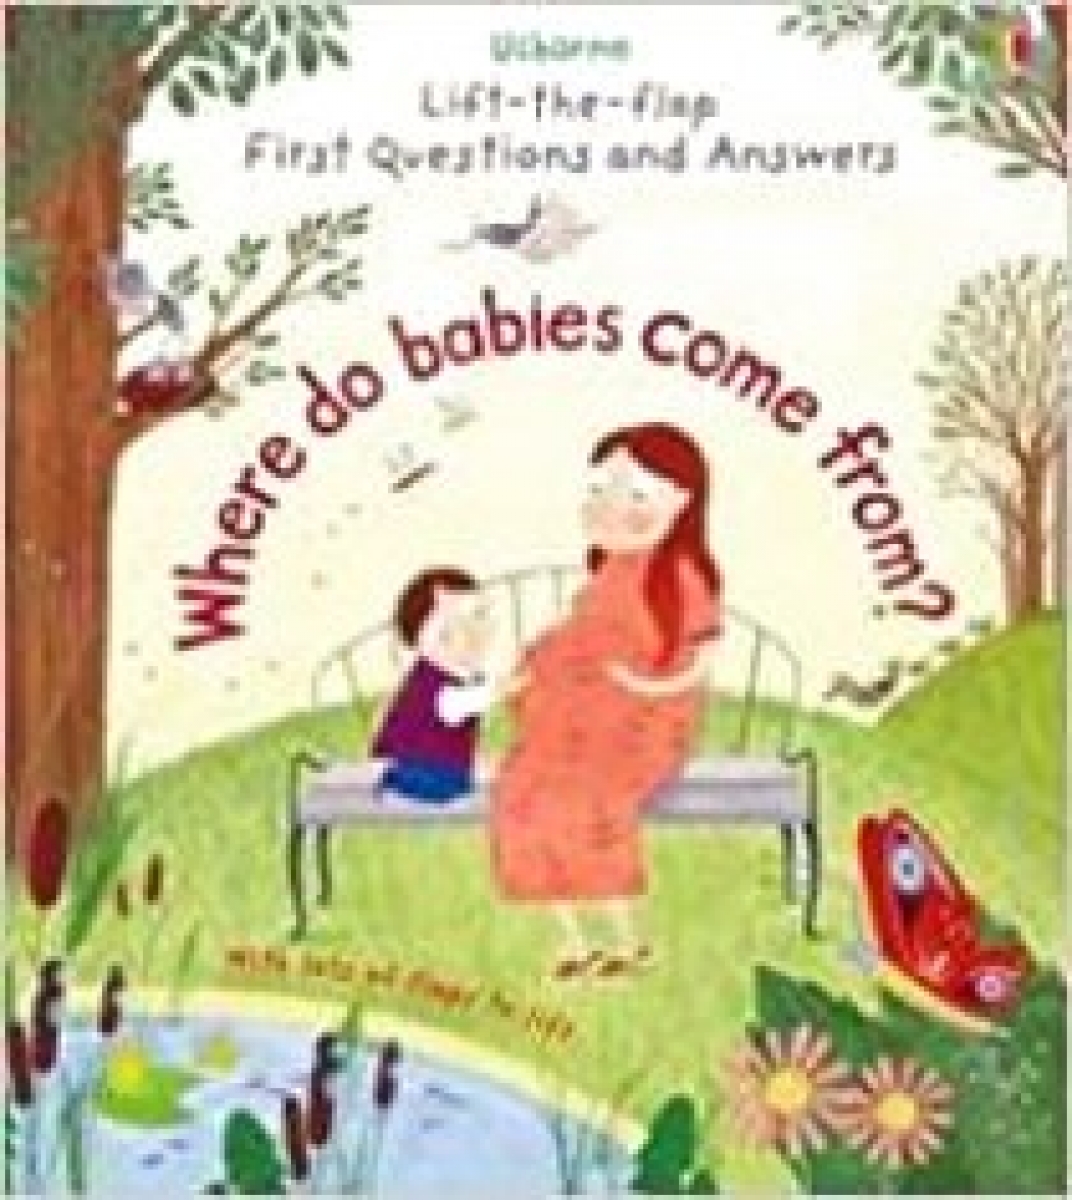 Daynes Katie LTF First Q and A Where do babies come from? 